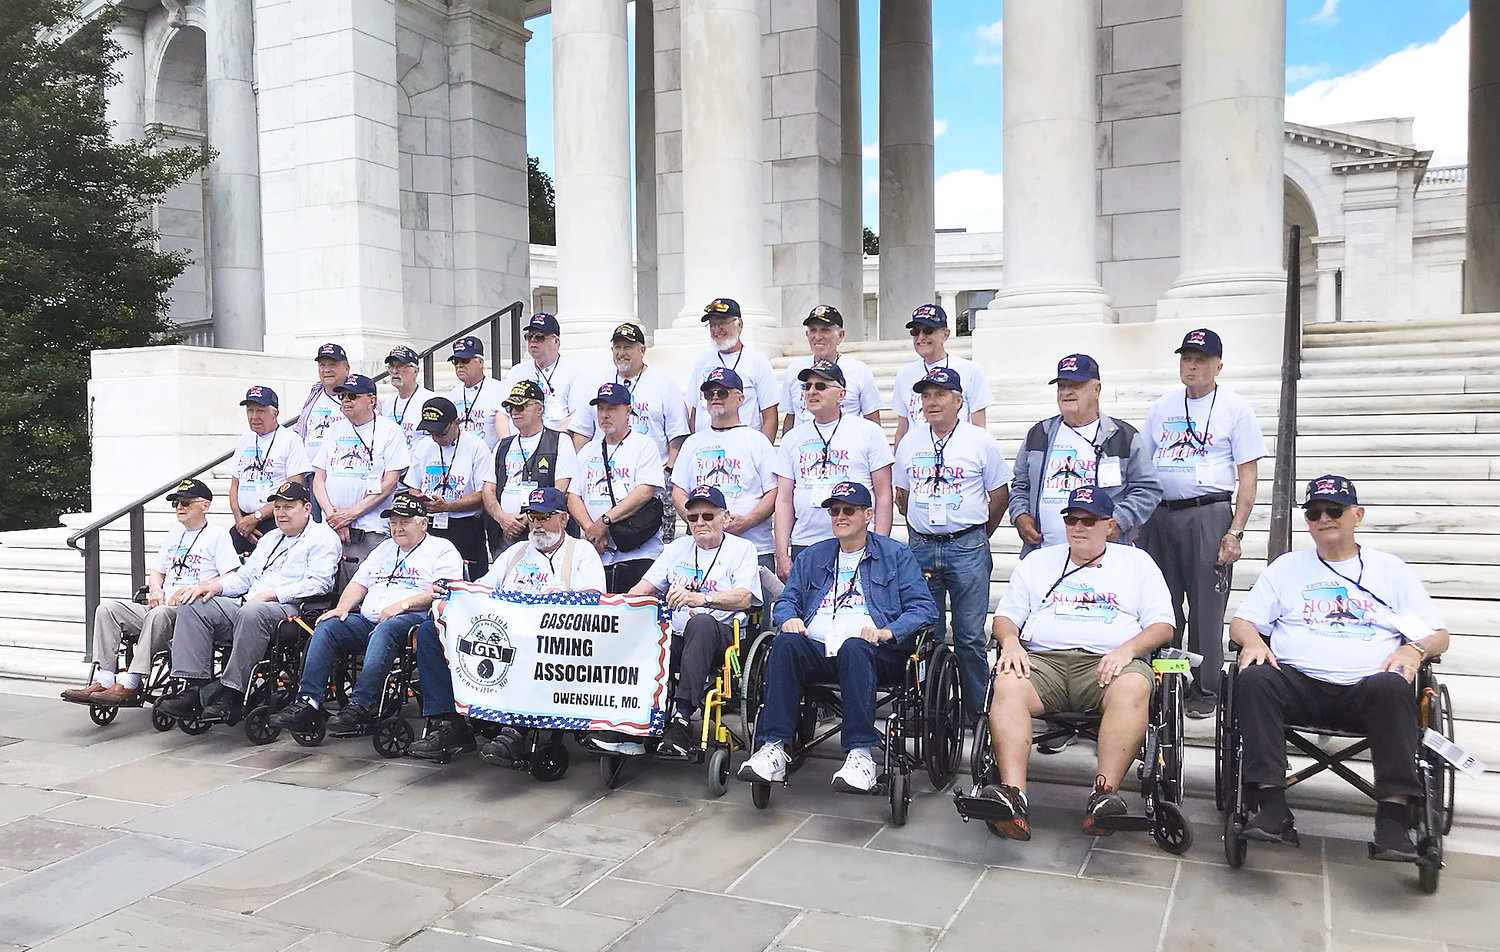 The group was photographed on the steps of the World War II memorial during their trip.